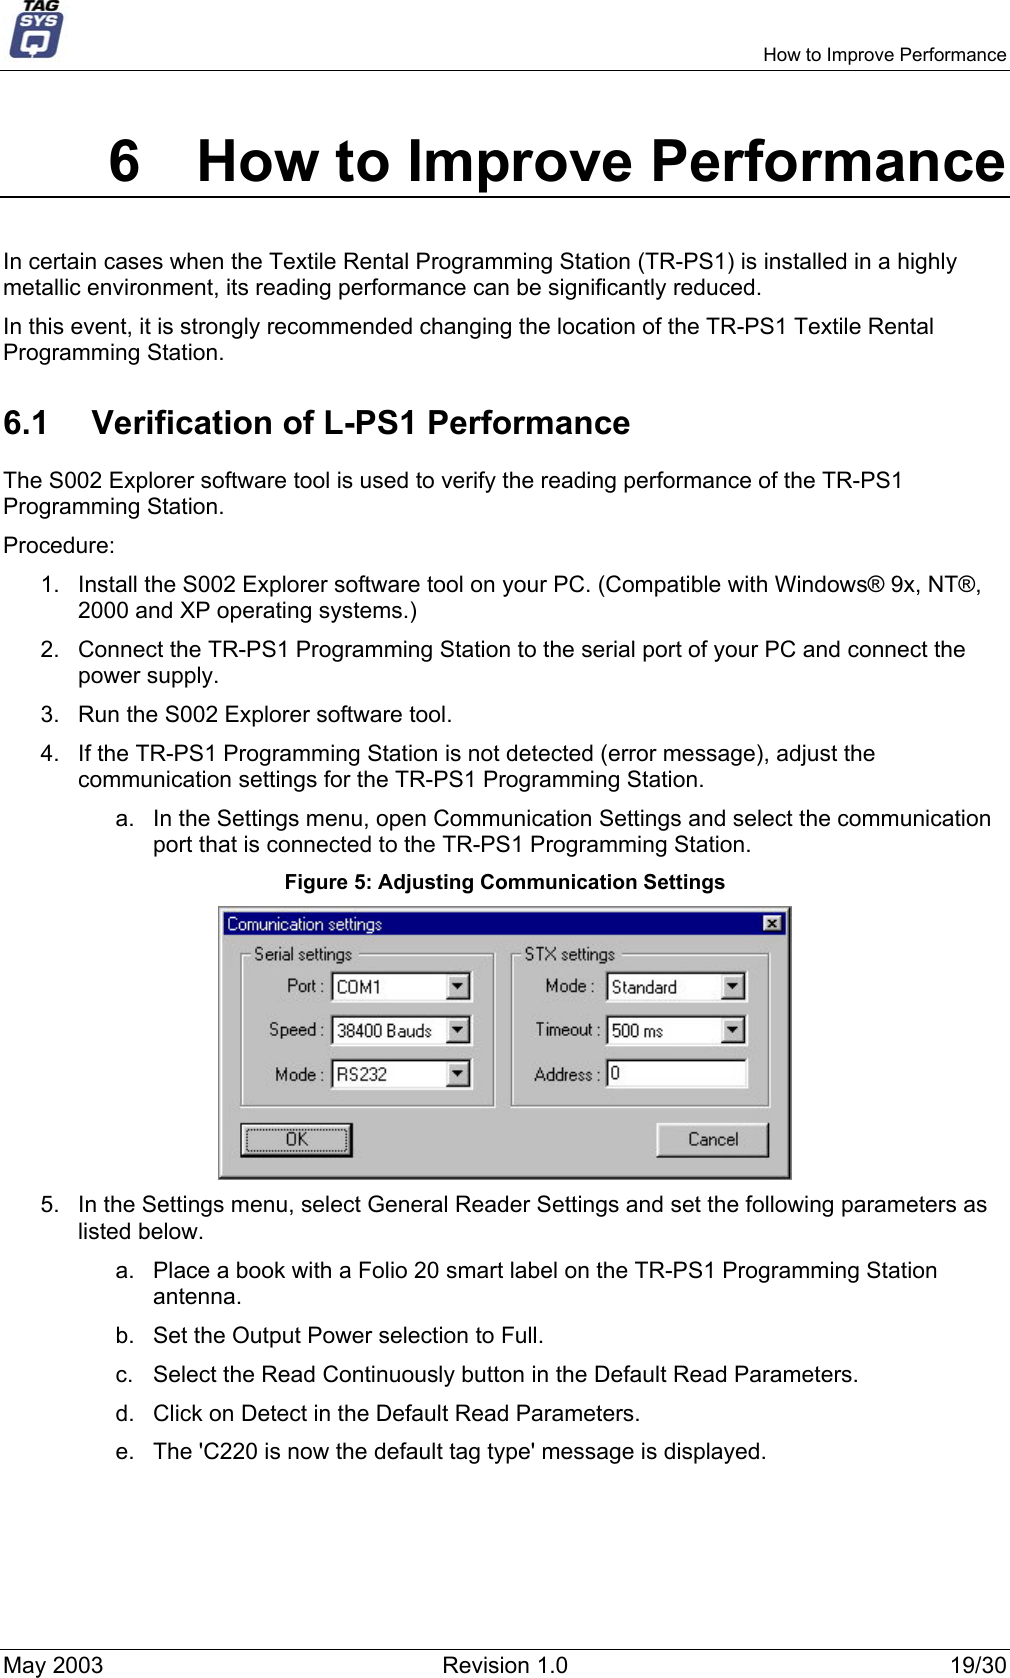     How to Improve Performance 6  How to Improve Performance In certain cases when the Textile Rental Programming Station (TR-PS1) is installed in a highly metallic environment, its reading performance can be significantly reduced.  In this event, it is strongly recommended changing the location of the TR-PS1 Textile Rental Programming Station. 6.1  Verification of L-PS1 Performance The S002 Explorer software tool is used to verify the reading performance of the TR-PS1 Programming Station. Procedure: 1.  Install the S002 Explorer software tool on your PC. (Compatible with Windows® 9x, NT®, 2000 and XP operating systems.) 2.  Connect the TR-PS1 Programming Station to the serial port of your PC and connect the power supply. 3.  Run the S002 Explorer software tool. 4.  If the TR-PS1 Programming Station is not detected (error message), adjust the communication settings for the TR-PS1 Programming Station. a.  In the Settings menu, open Communication Settings and select the communication port that is connected to the TR-PS1 Programming Station. Figure 5: Adjusting Communication Settings  5.  In the Settings menu, select General Reader Settings and set the following parameters as listed below. a.  Place a book with a Folio 20 smart label on the TR-PS1 Programming Station antenna. b.  Set the Output Power selection to Full. c.  Select the Read Continuously button in the Default Read Parameters. d.  Click on Detect in the Default Read Parameters. e.  The &apos;C220 is now the default tag type&apos; message is displayed. May 2003  Revision 1.0  19/30 